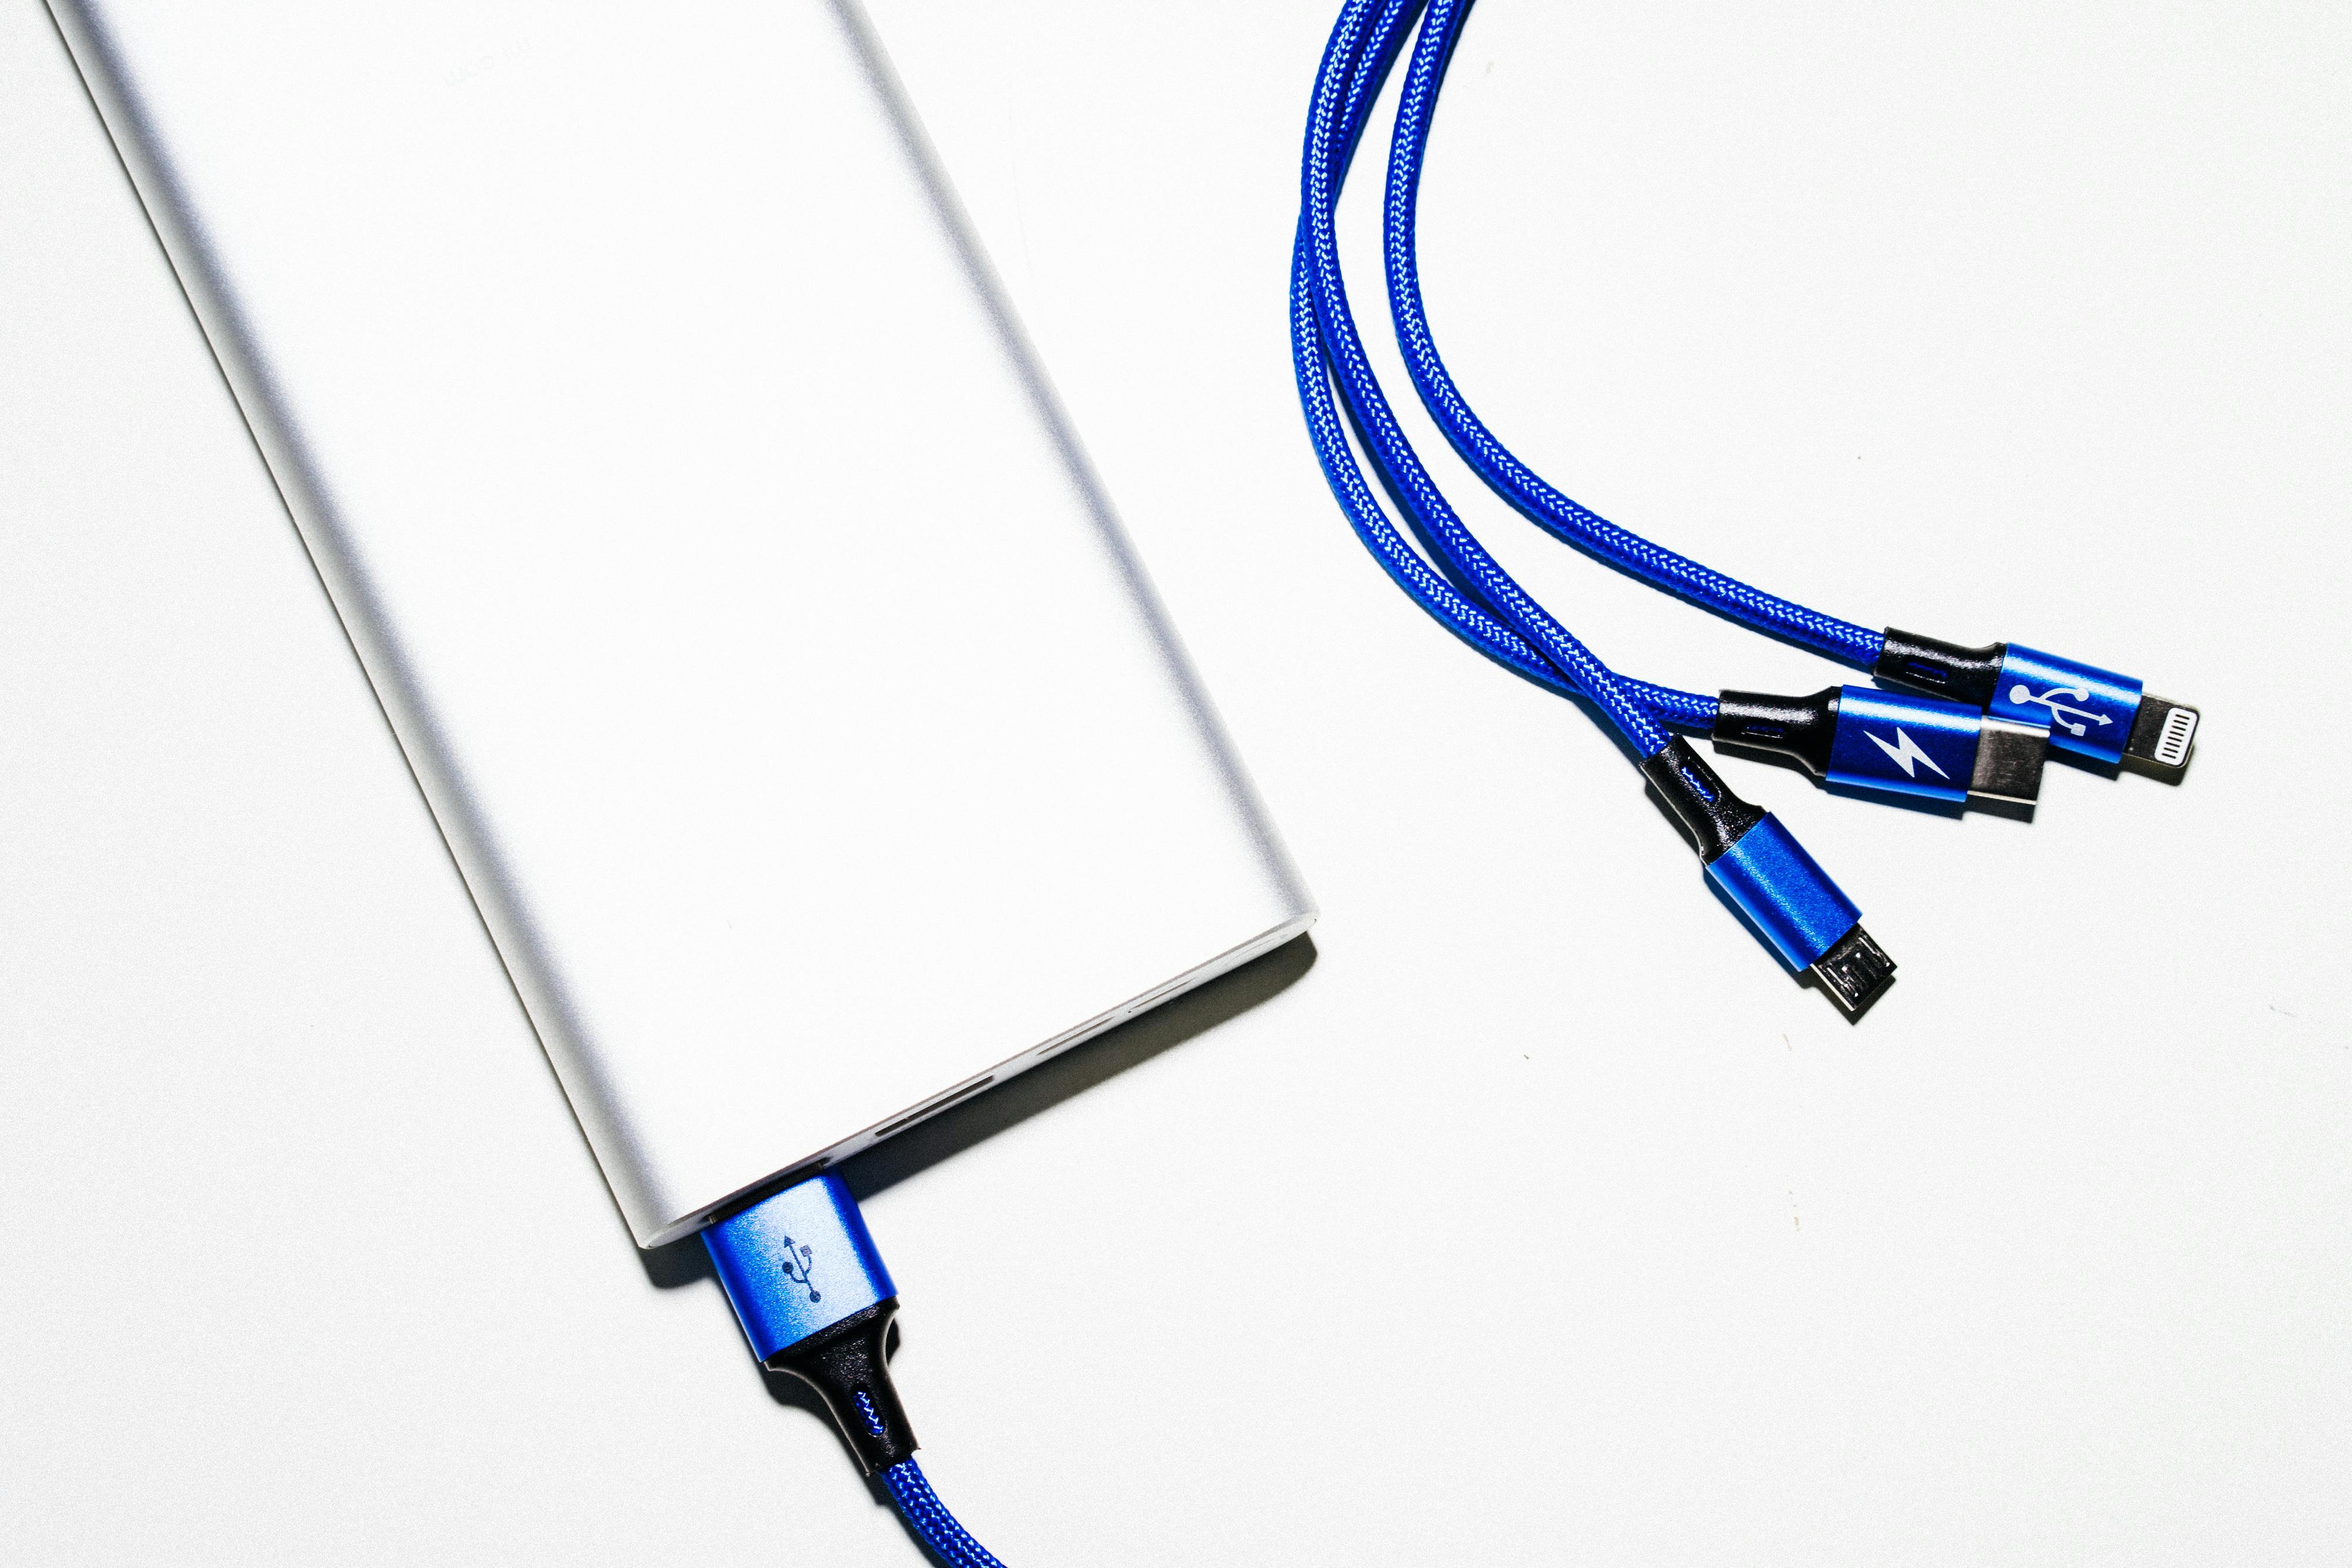 White Power Bank and Blue Coated Wires \u00b7 Free Stock Photo